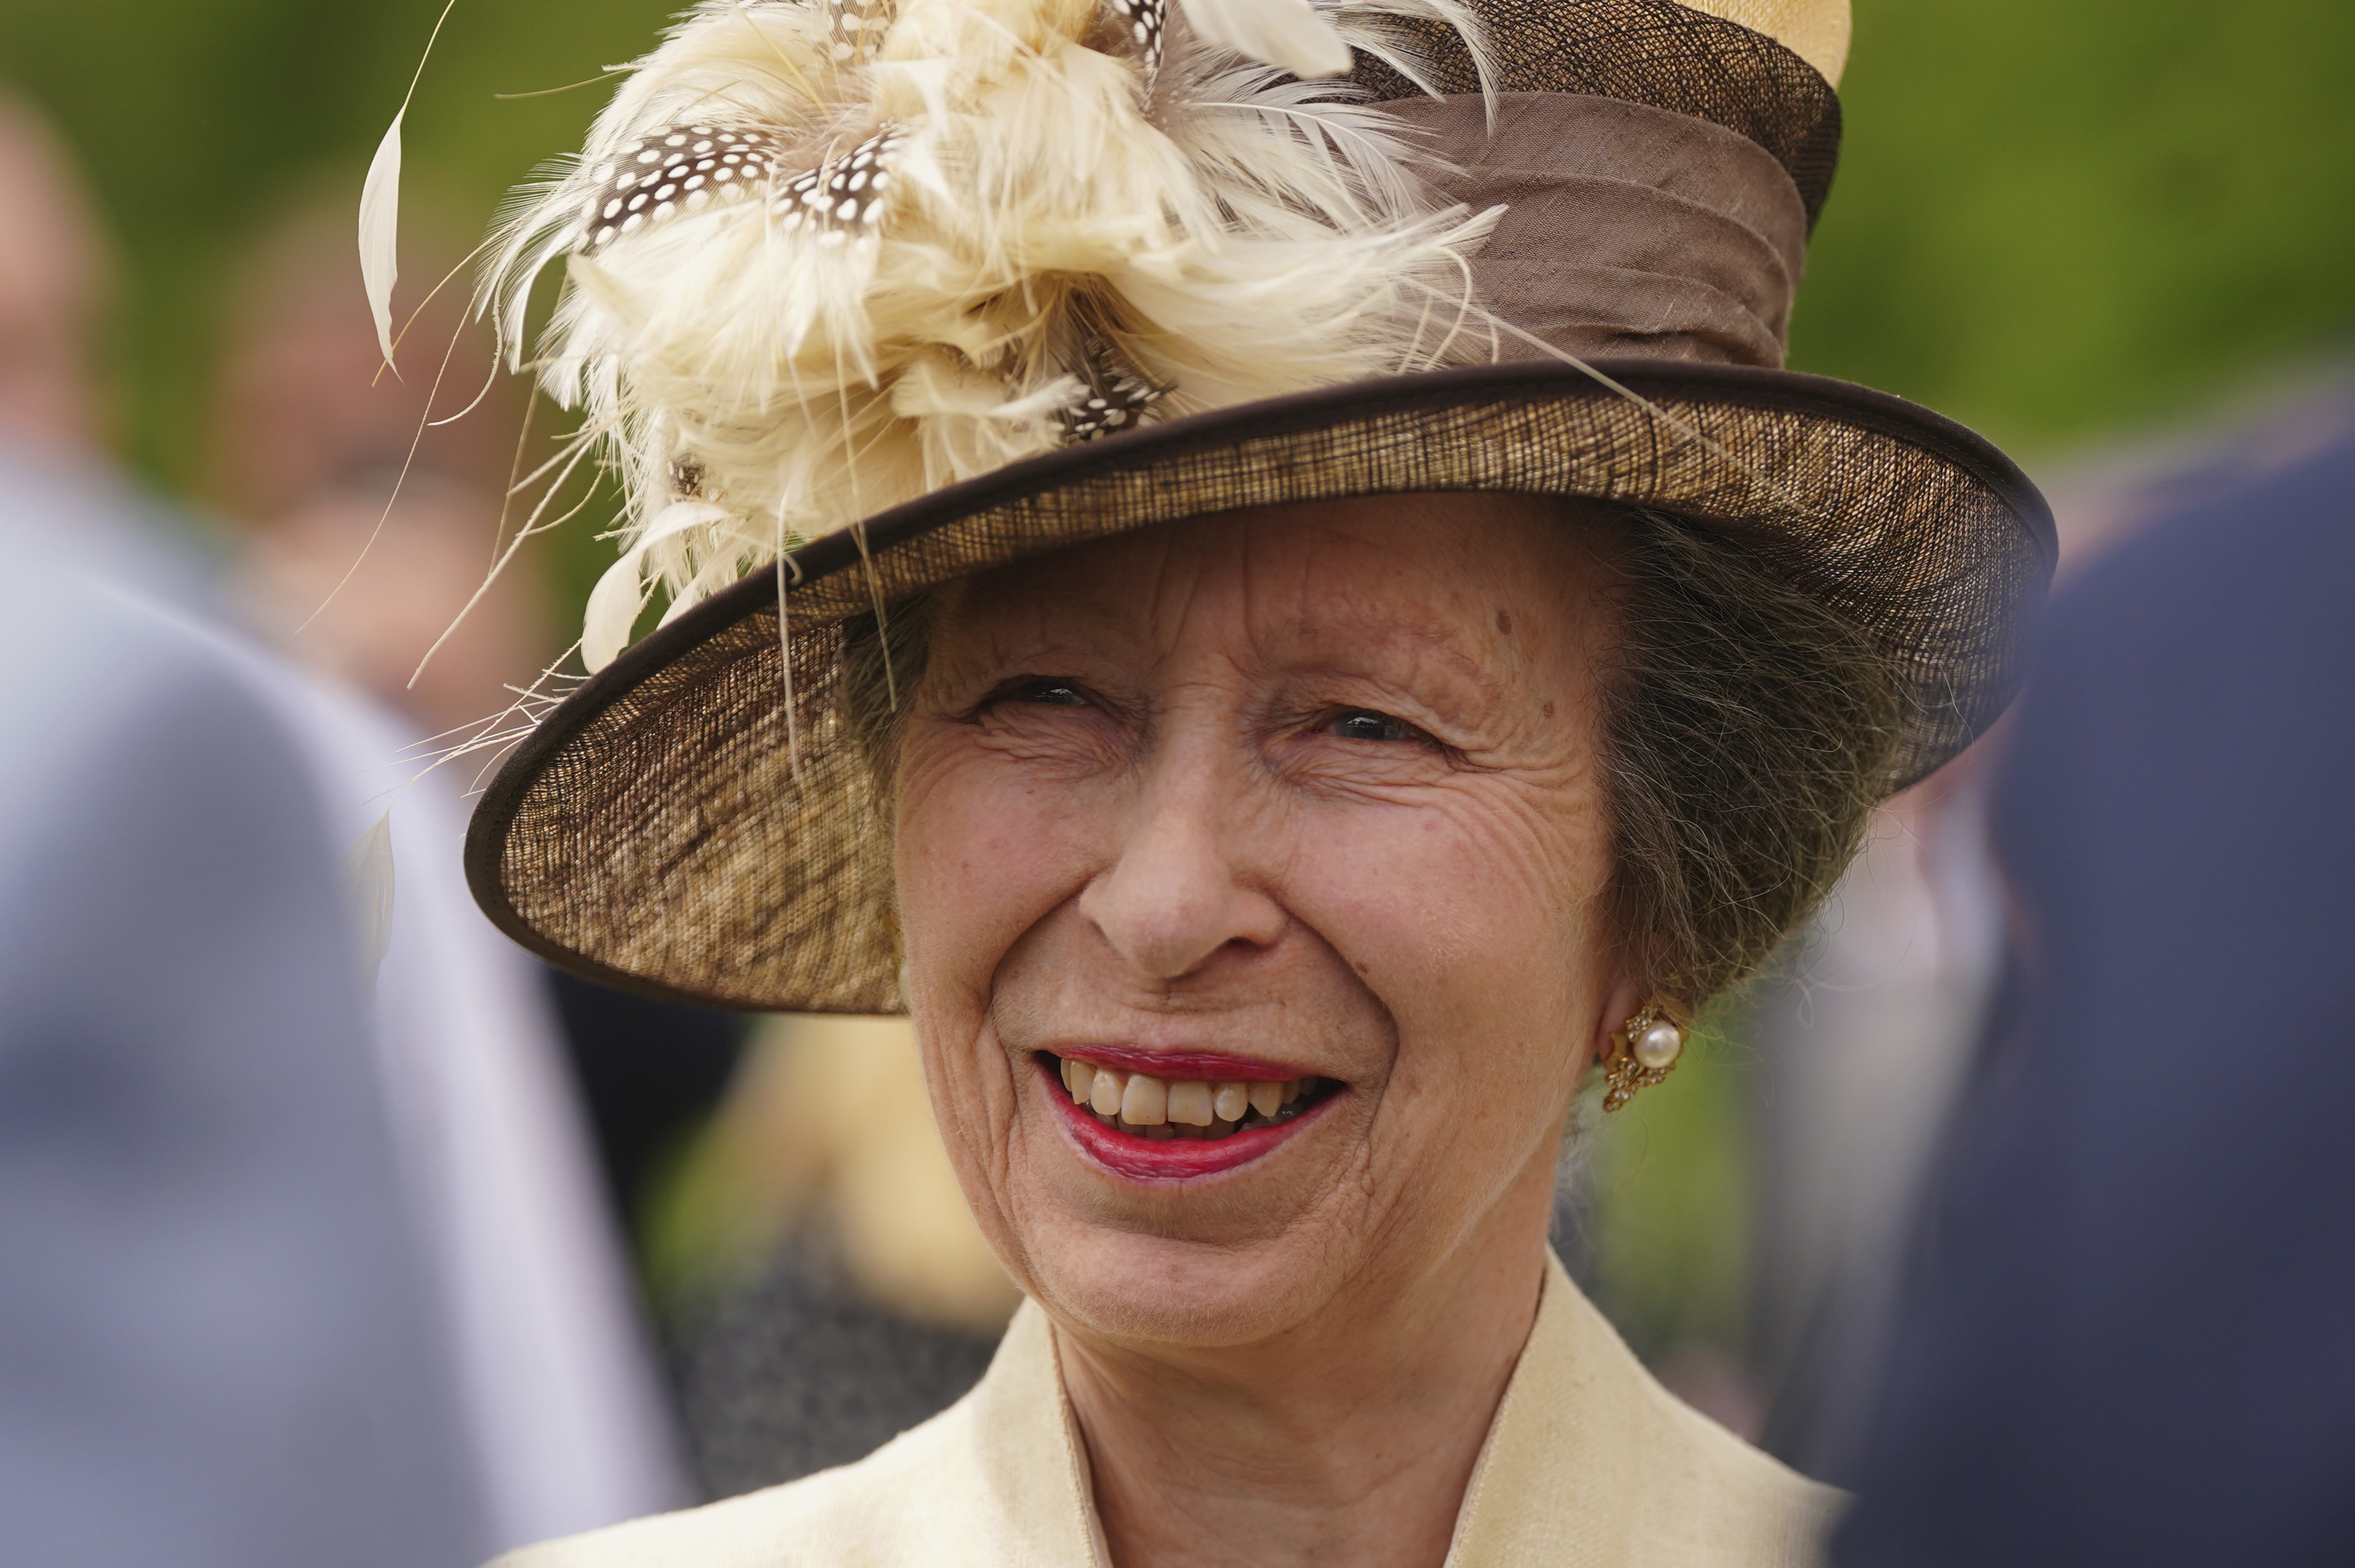 FILE - Britain's Princess Anne attends the Not Forgotten Association Annual Garden Party at Buckingham Palace in London, Friday May 17, 2024. On Friday, June 28, 2024, Princess Anne left the hospital and returned to her southwestern England estate after an accident thought to involve a horse left her with a concussion. (Victoria Jones/Pool Photo via AP, File)